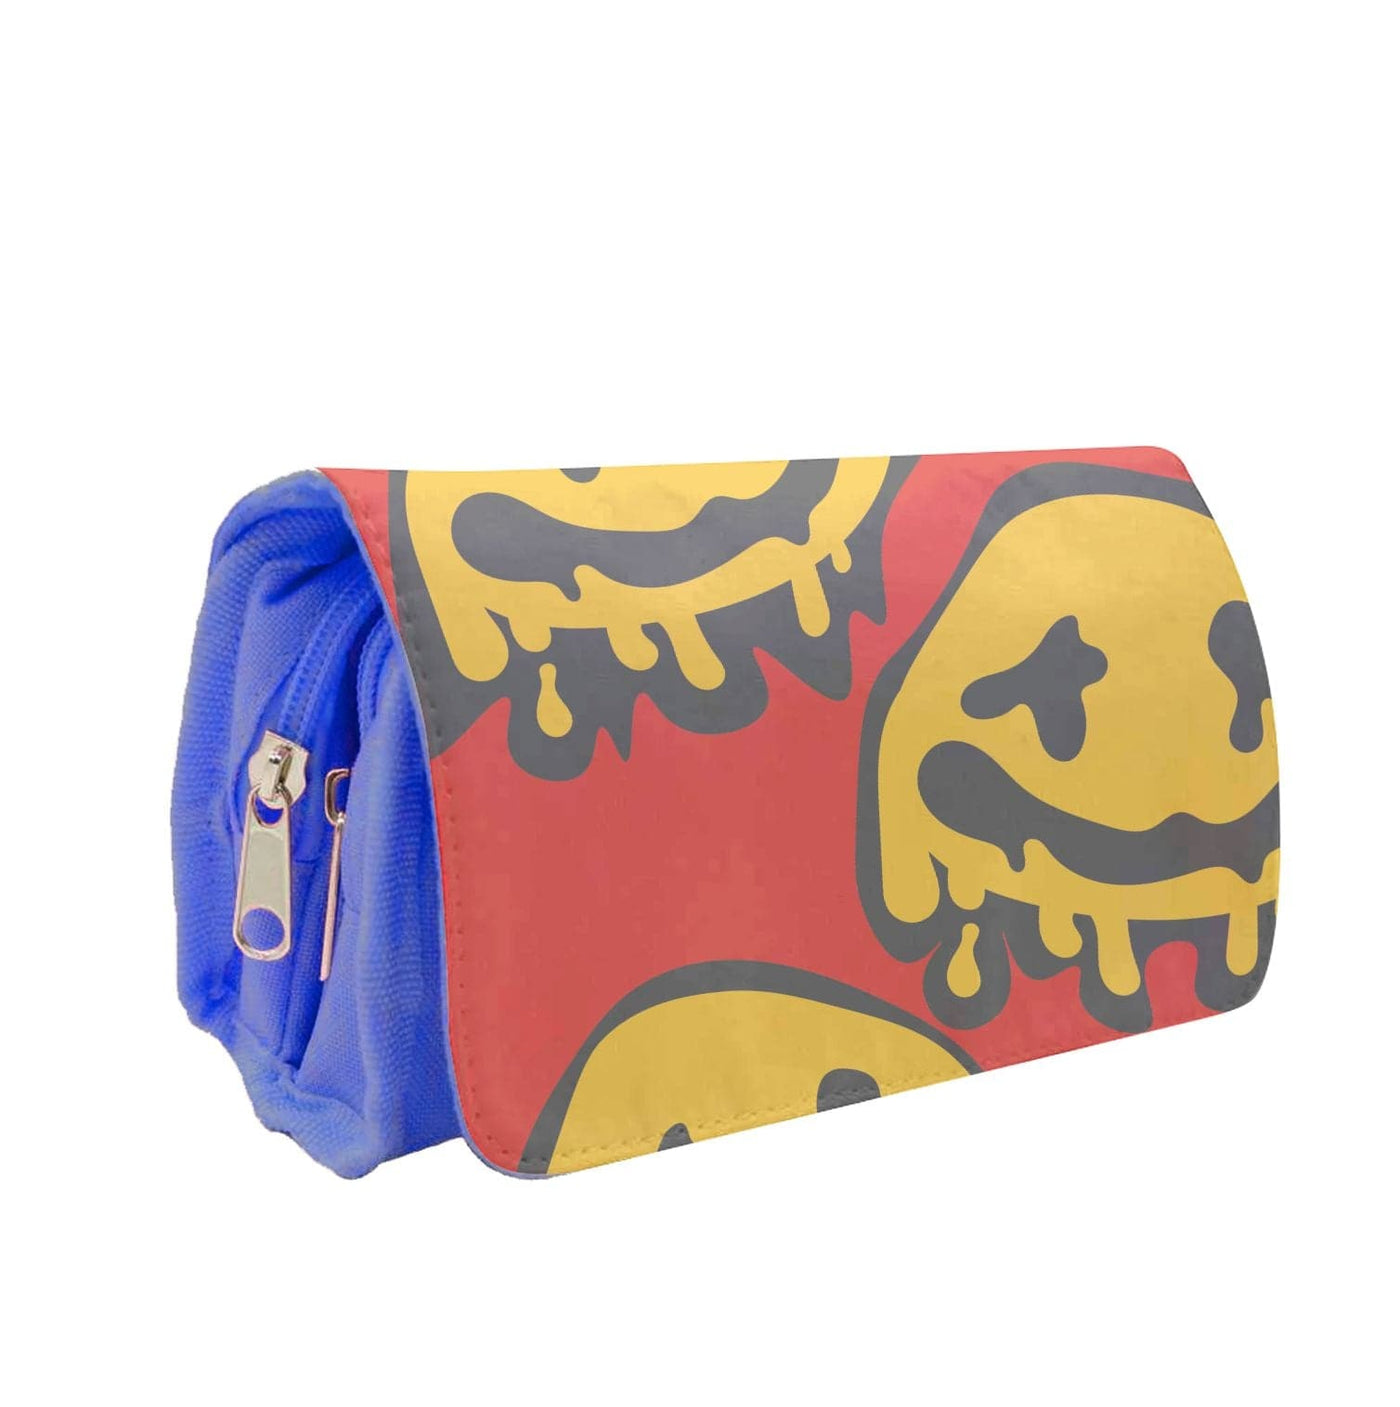 Dripping Smiley - Skate Aesthetic  Pencil Case